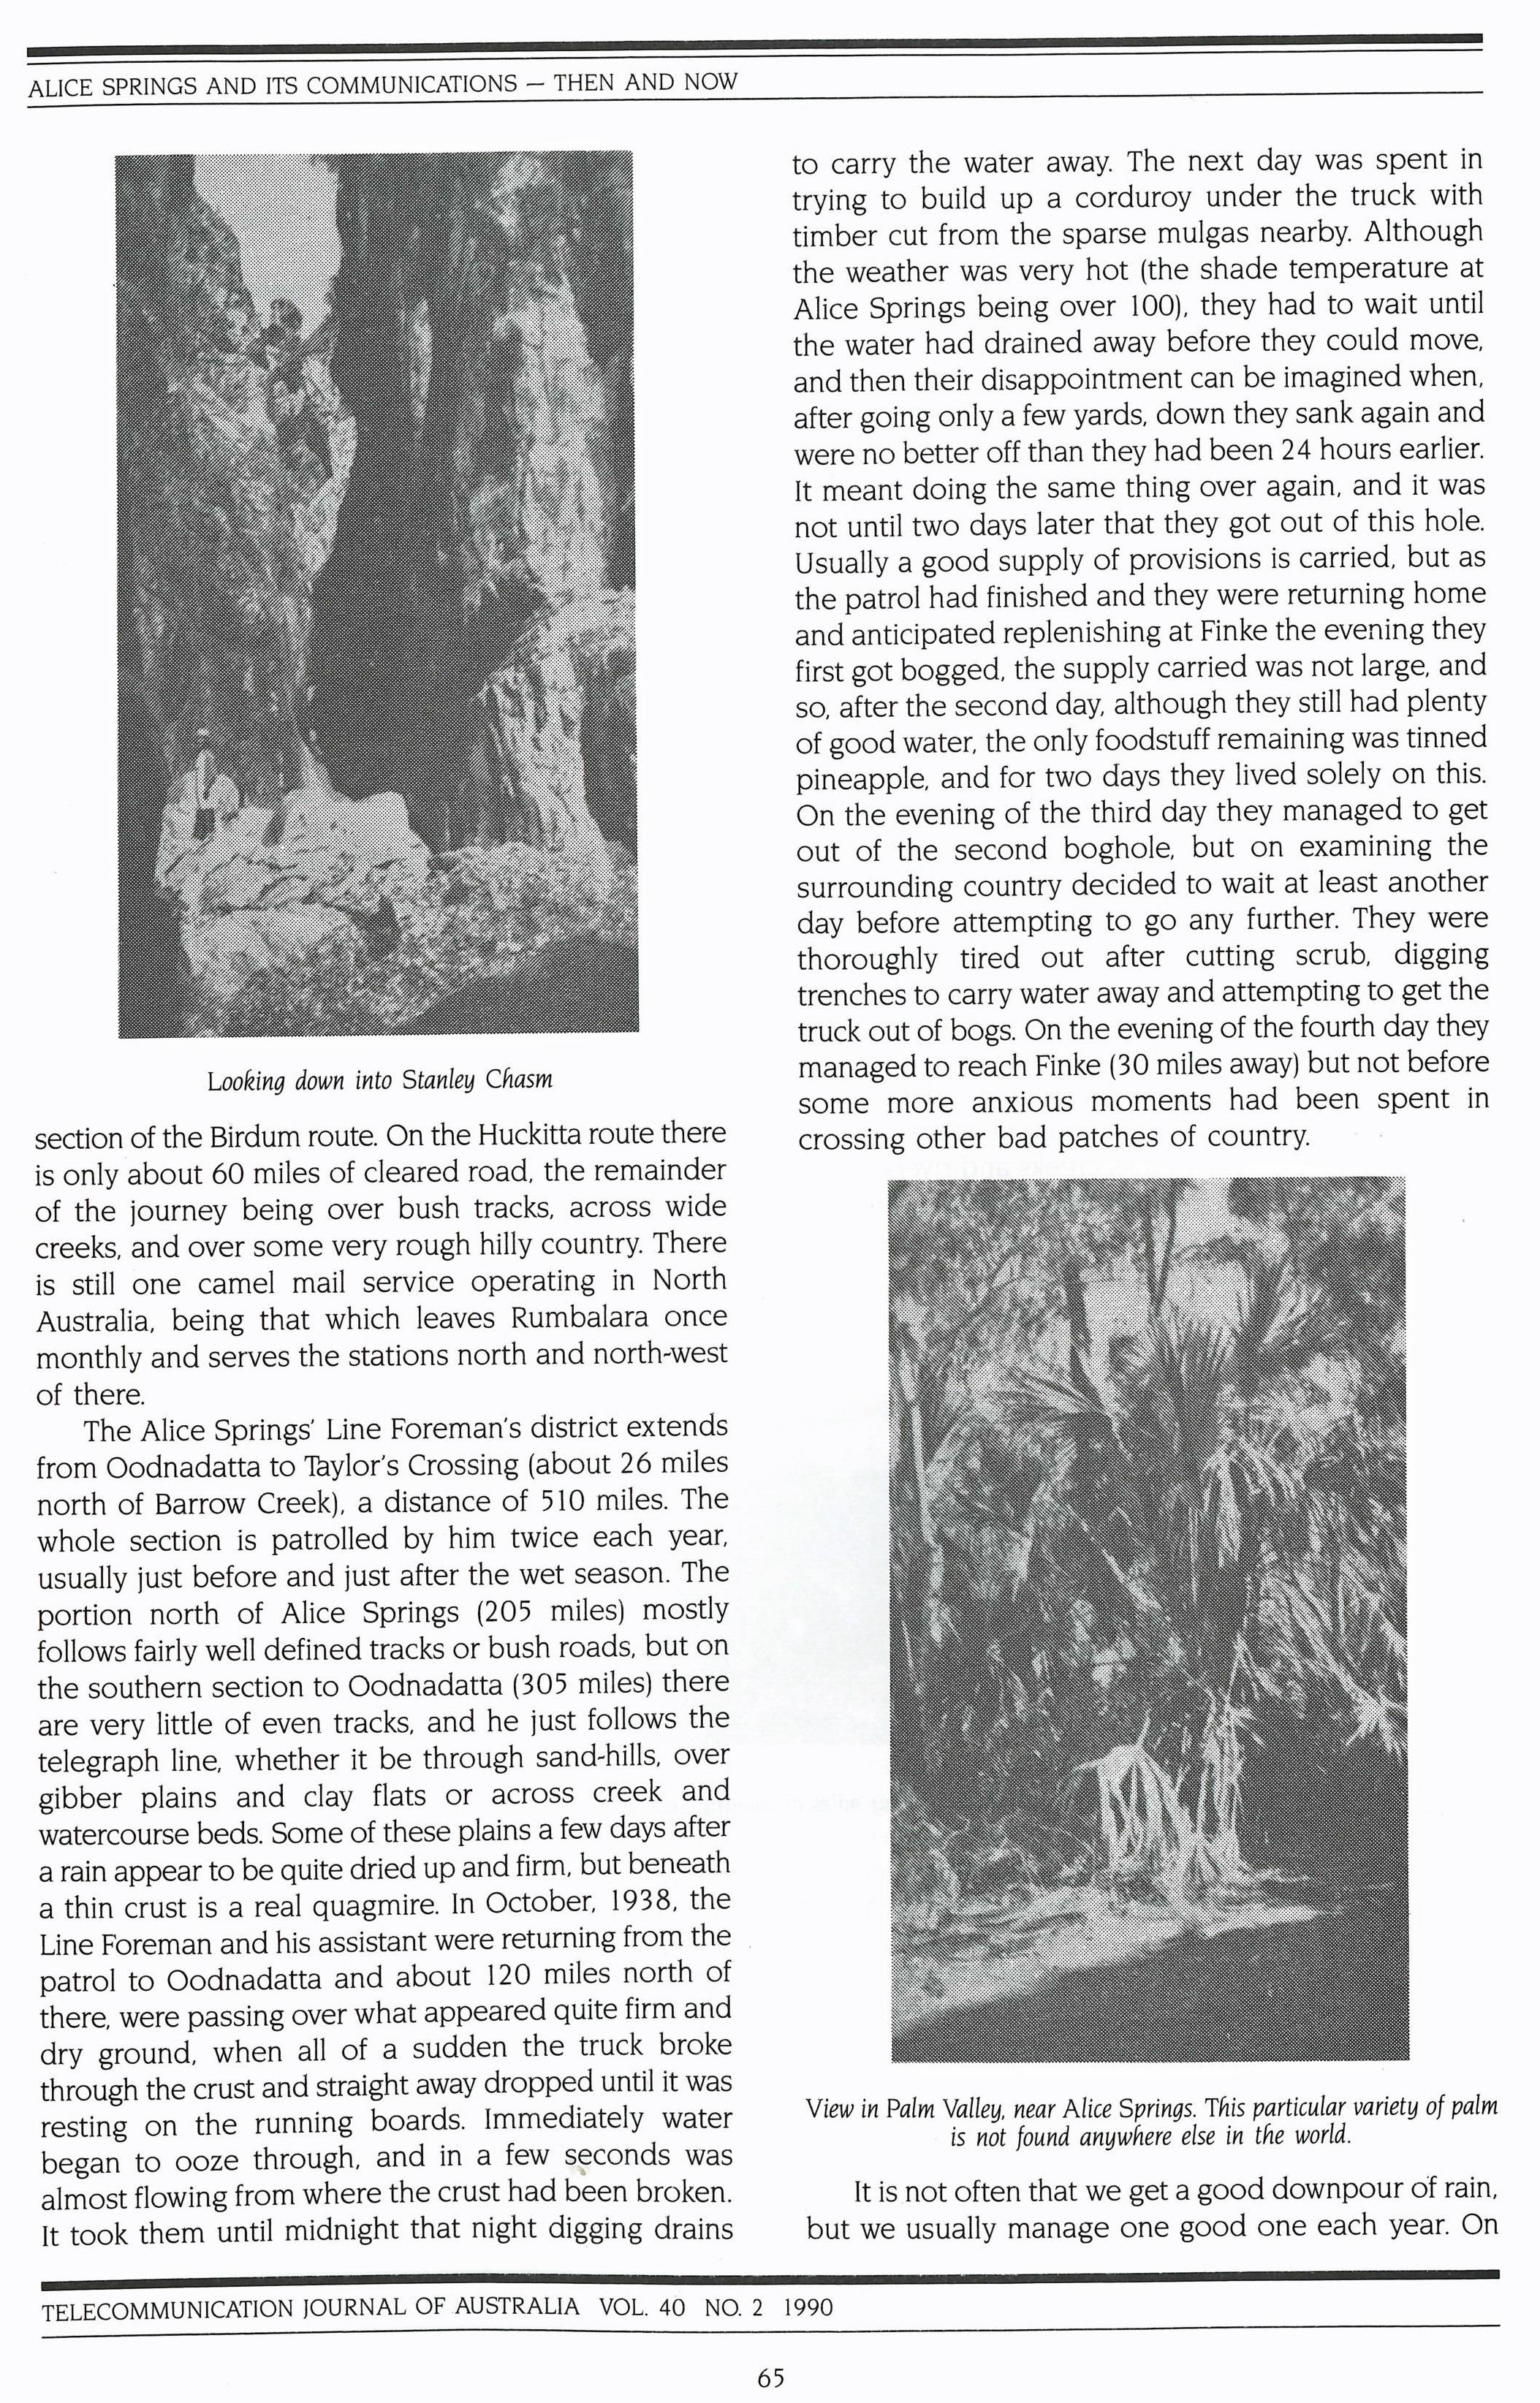 Page 4 of 1990 historical paper